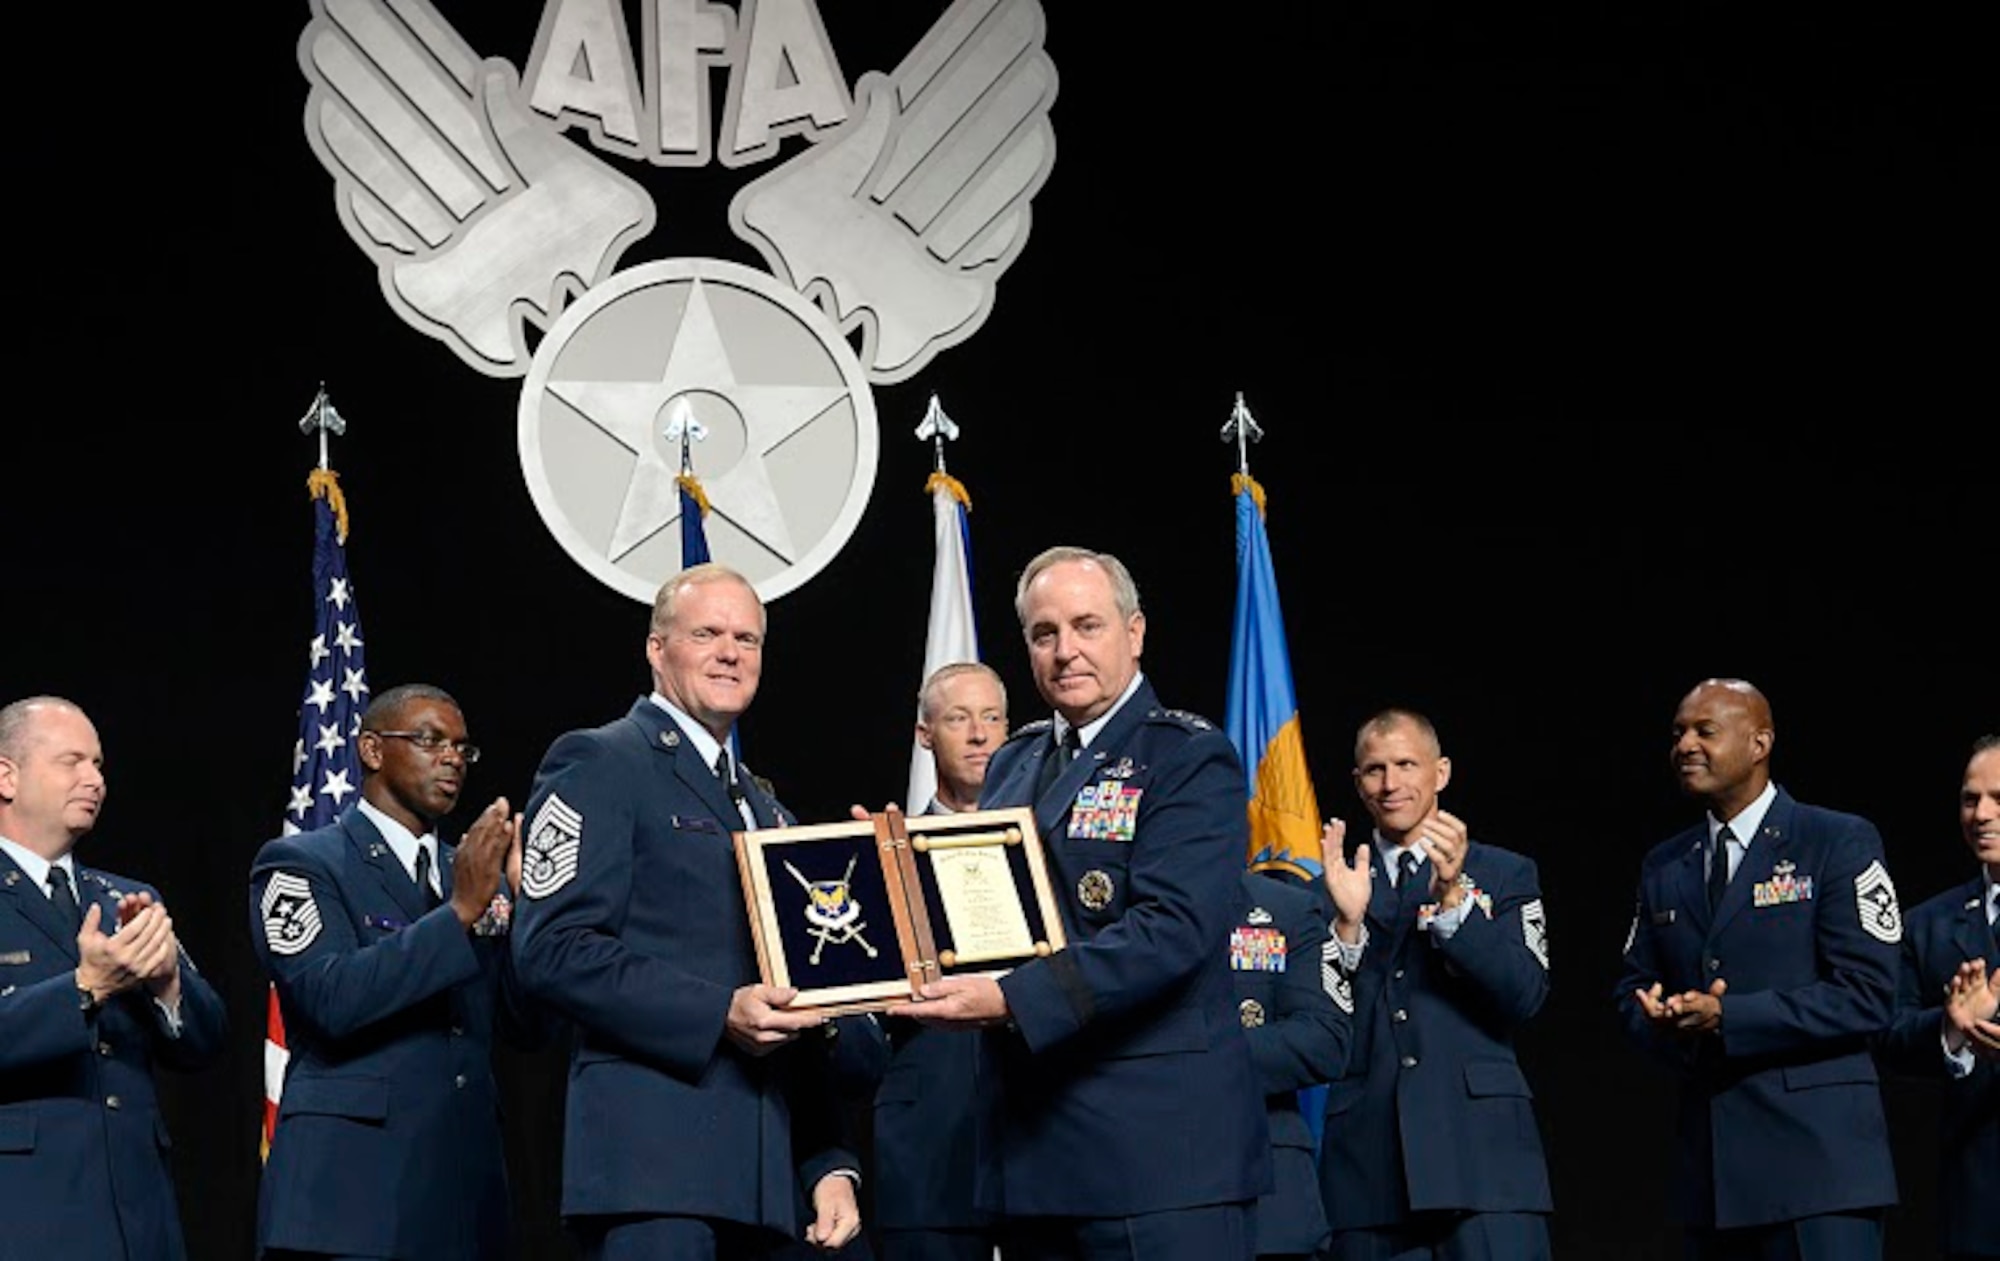 Chief Master Sgt. of the Air Force James A. Cody thanks Air Force Chief of Staff Gen. Mark A. Welsh III for his exceptional service by presenting him with an invitation to an Order of the Sword ceremony following Cody's "Enlisted Force Update" at Air Force Association's Air and Space Conference and Technology Exposition Sept. 16, 2015, in Washington, D.C.  (U.S. Air Force photo/Scott M. Ash)  